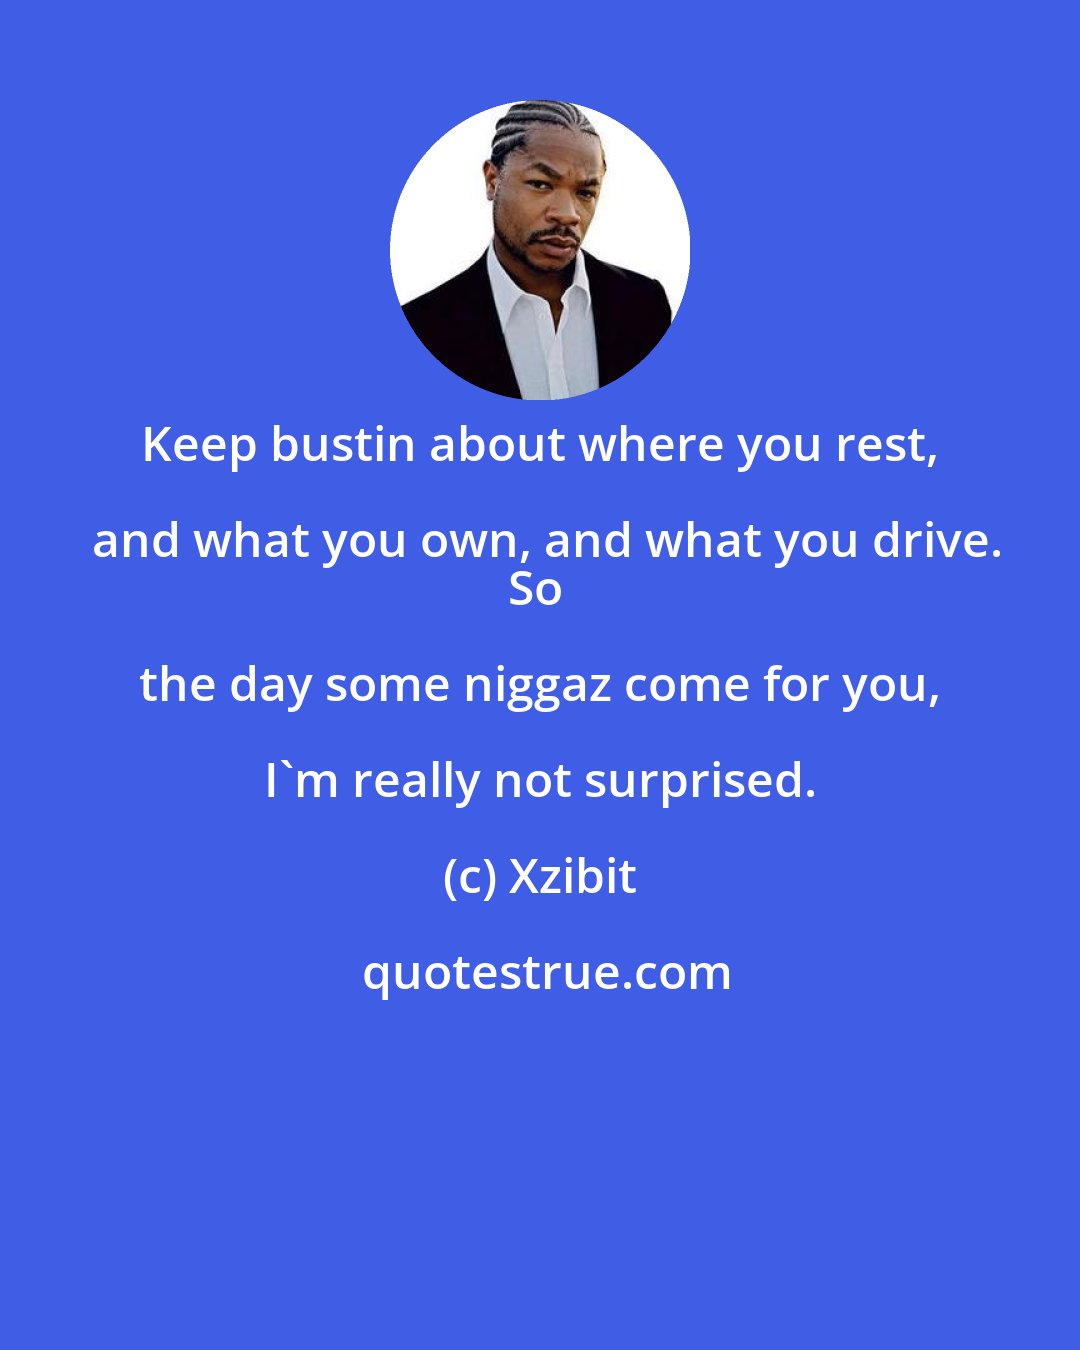 Xzibit: Keep bustin about where you rest, and what you own, and what you drive.
So the day some niggaz come for you, I'm really not surprised.